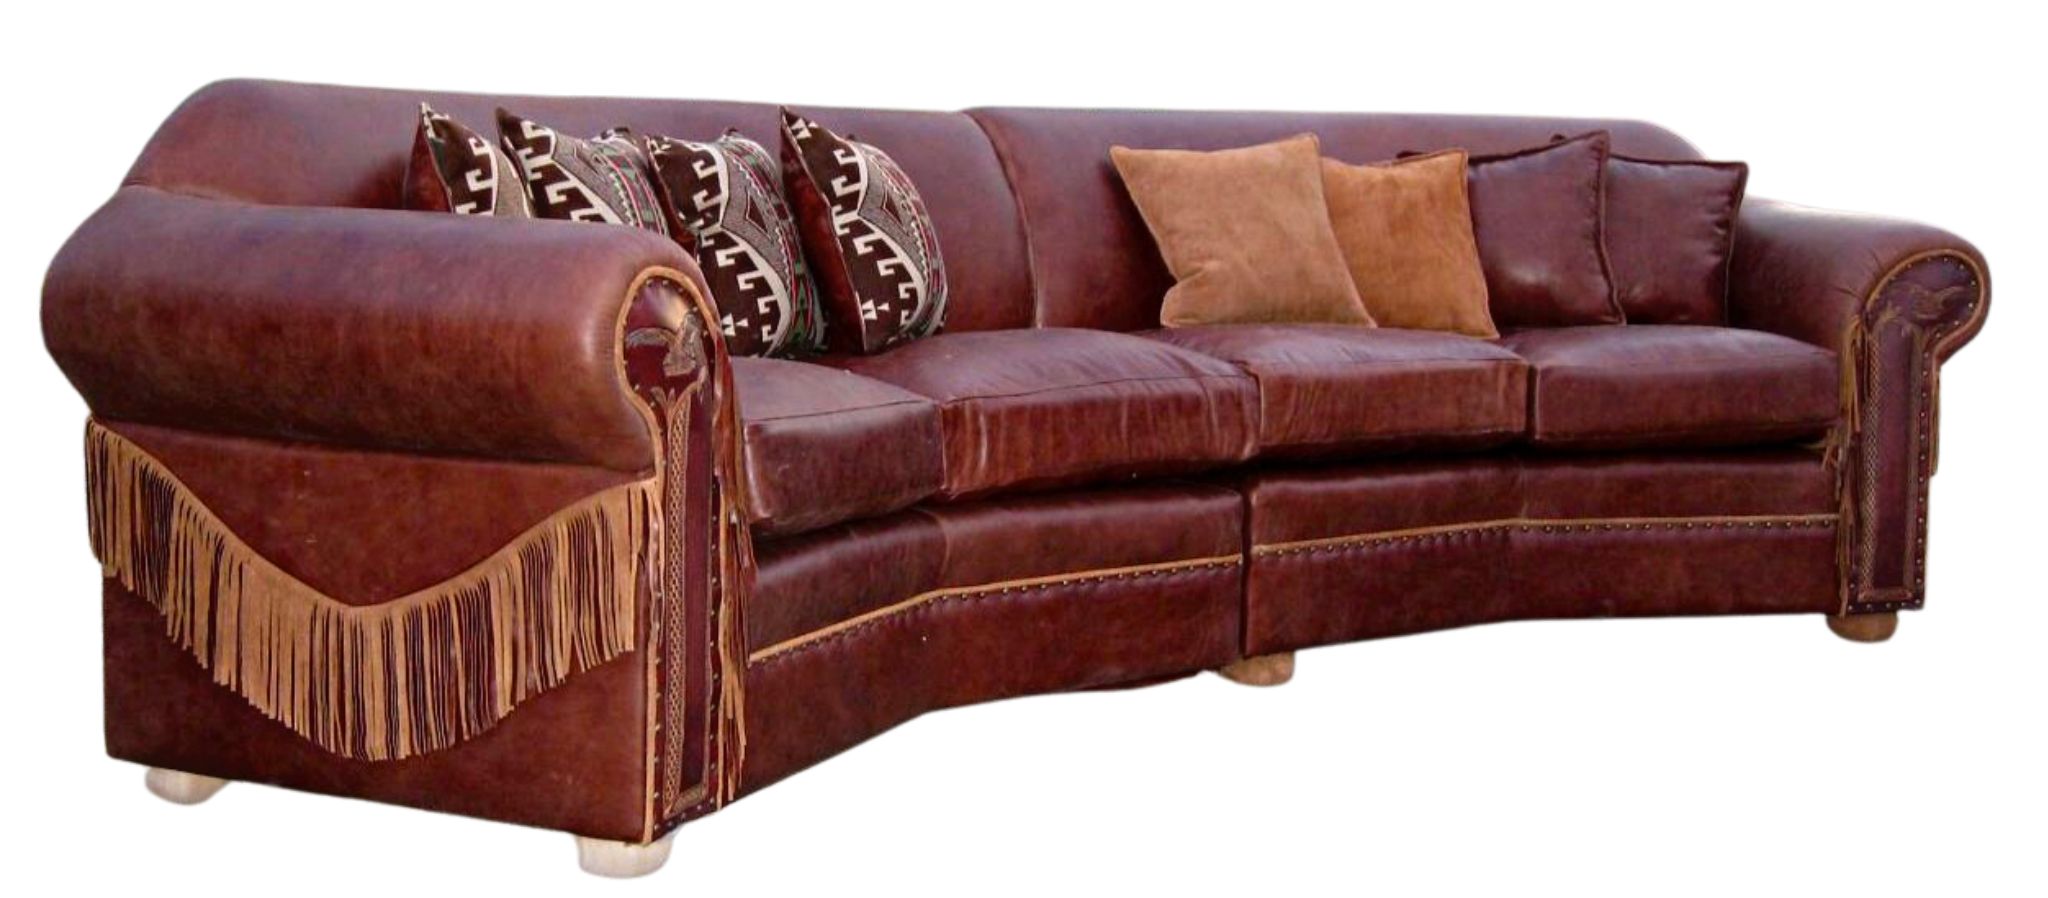 4 seat leather sofa with tooled arms and fringe